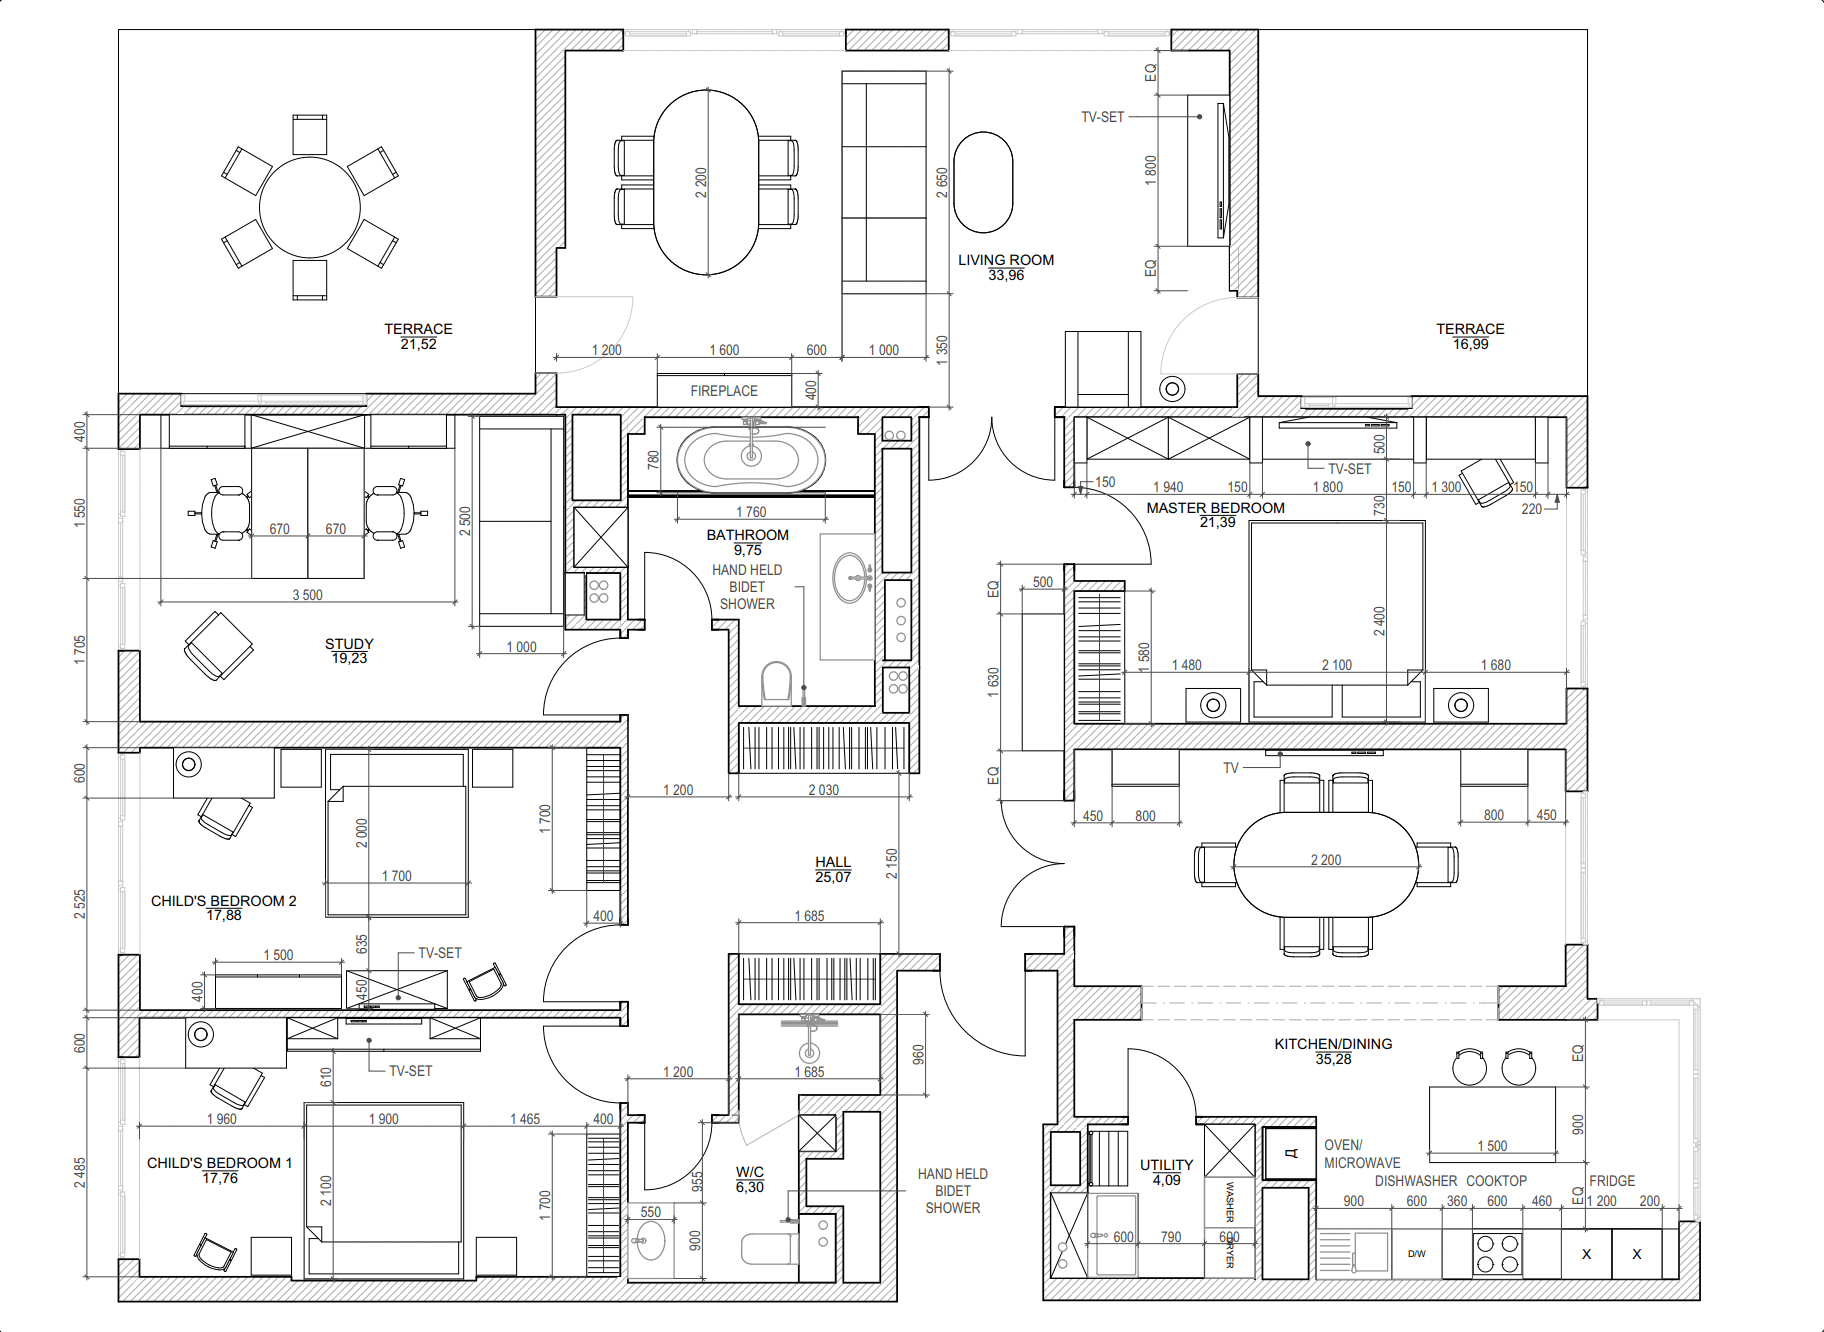 Furniture Layout Architectural Drawing